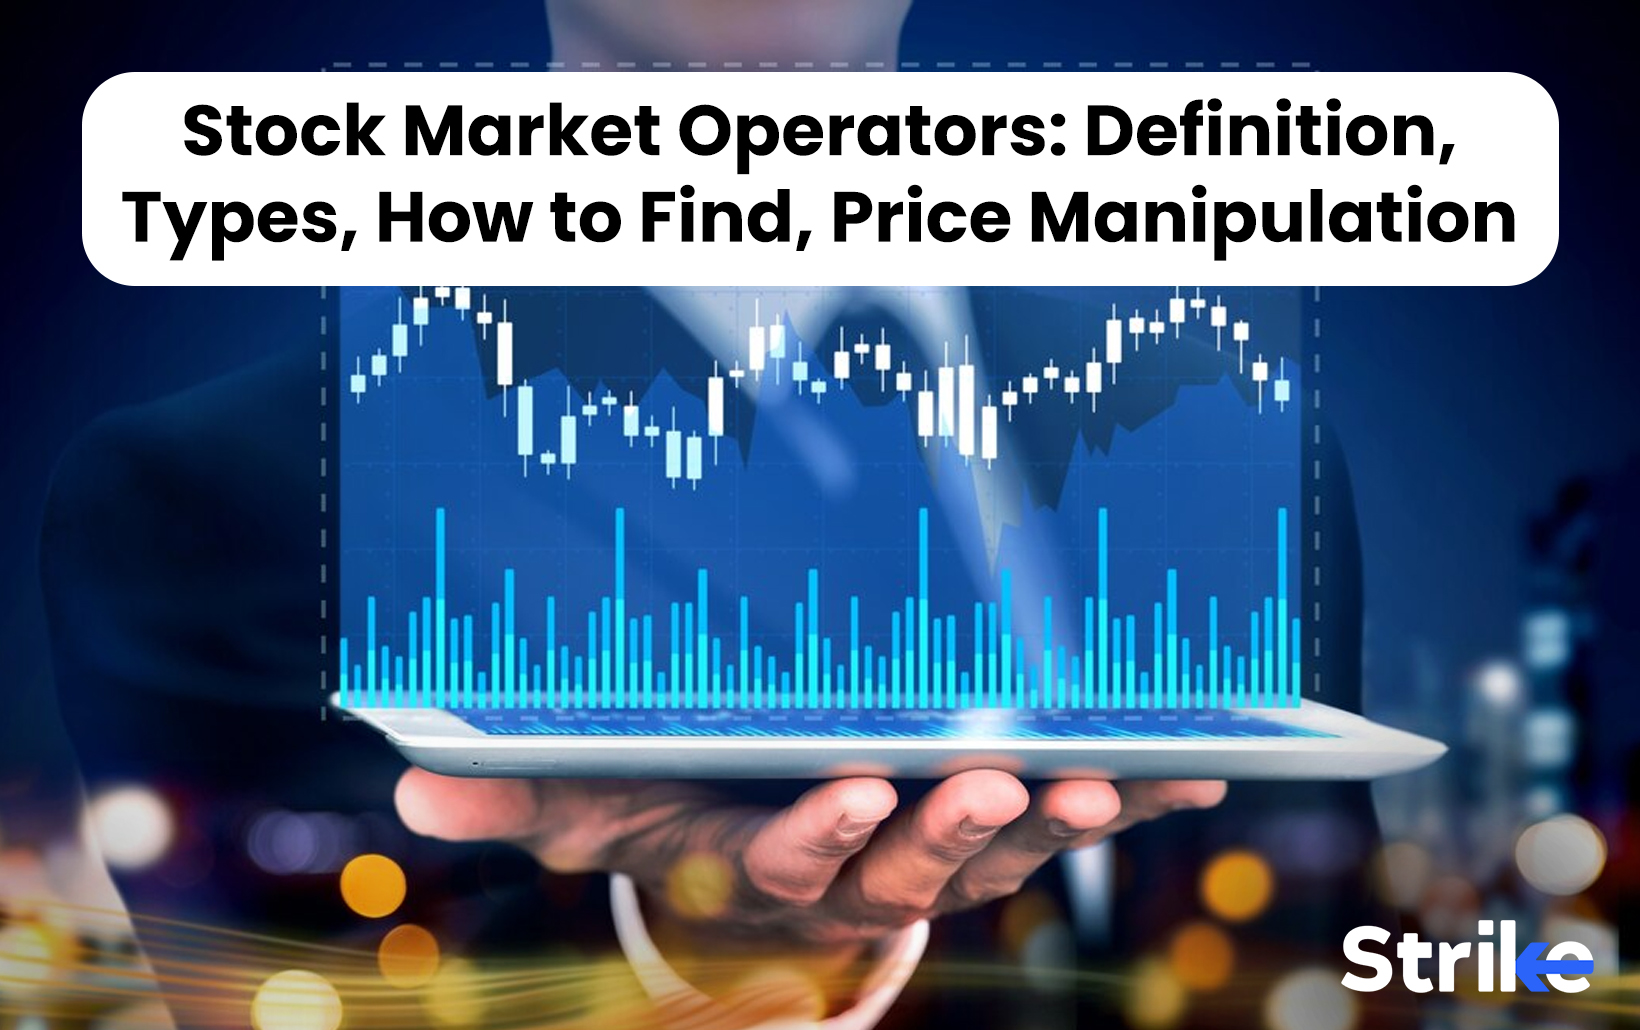 Stock Market Operators: Definition, Types, How to Find, Price Manipulation